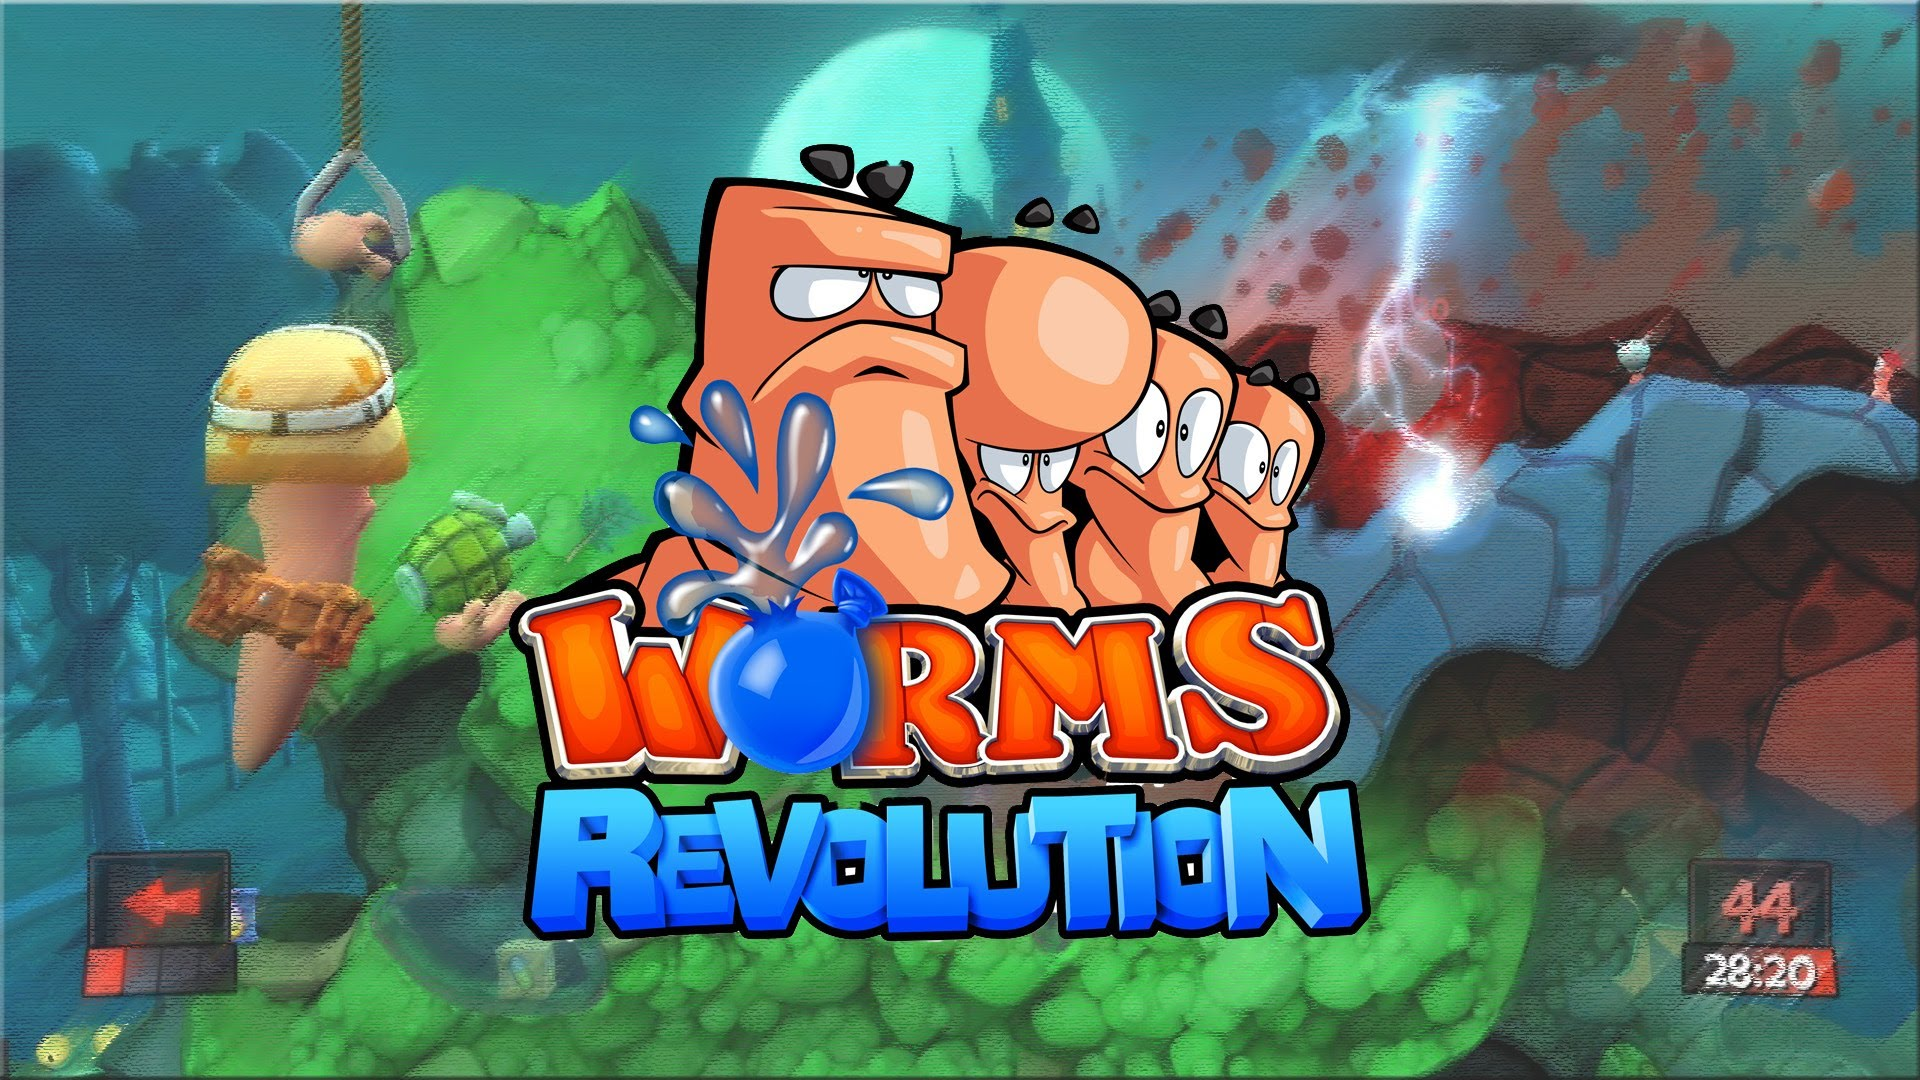 worms 2d pc game